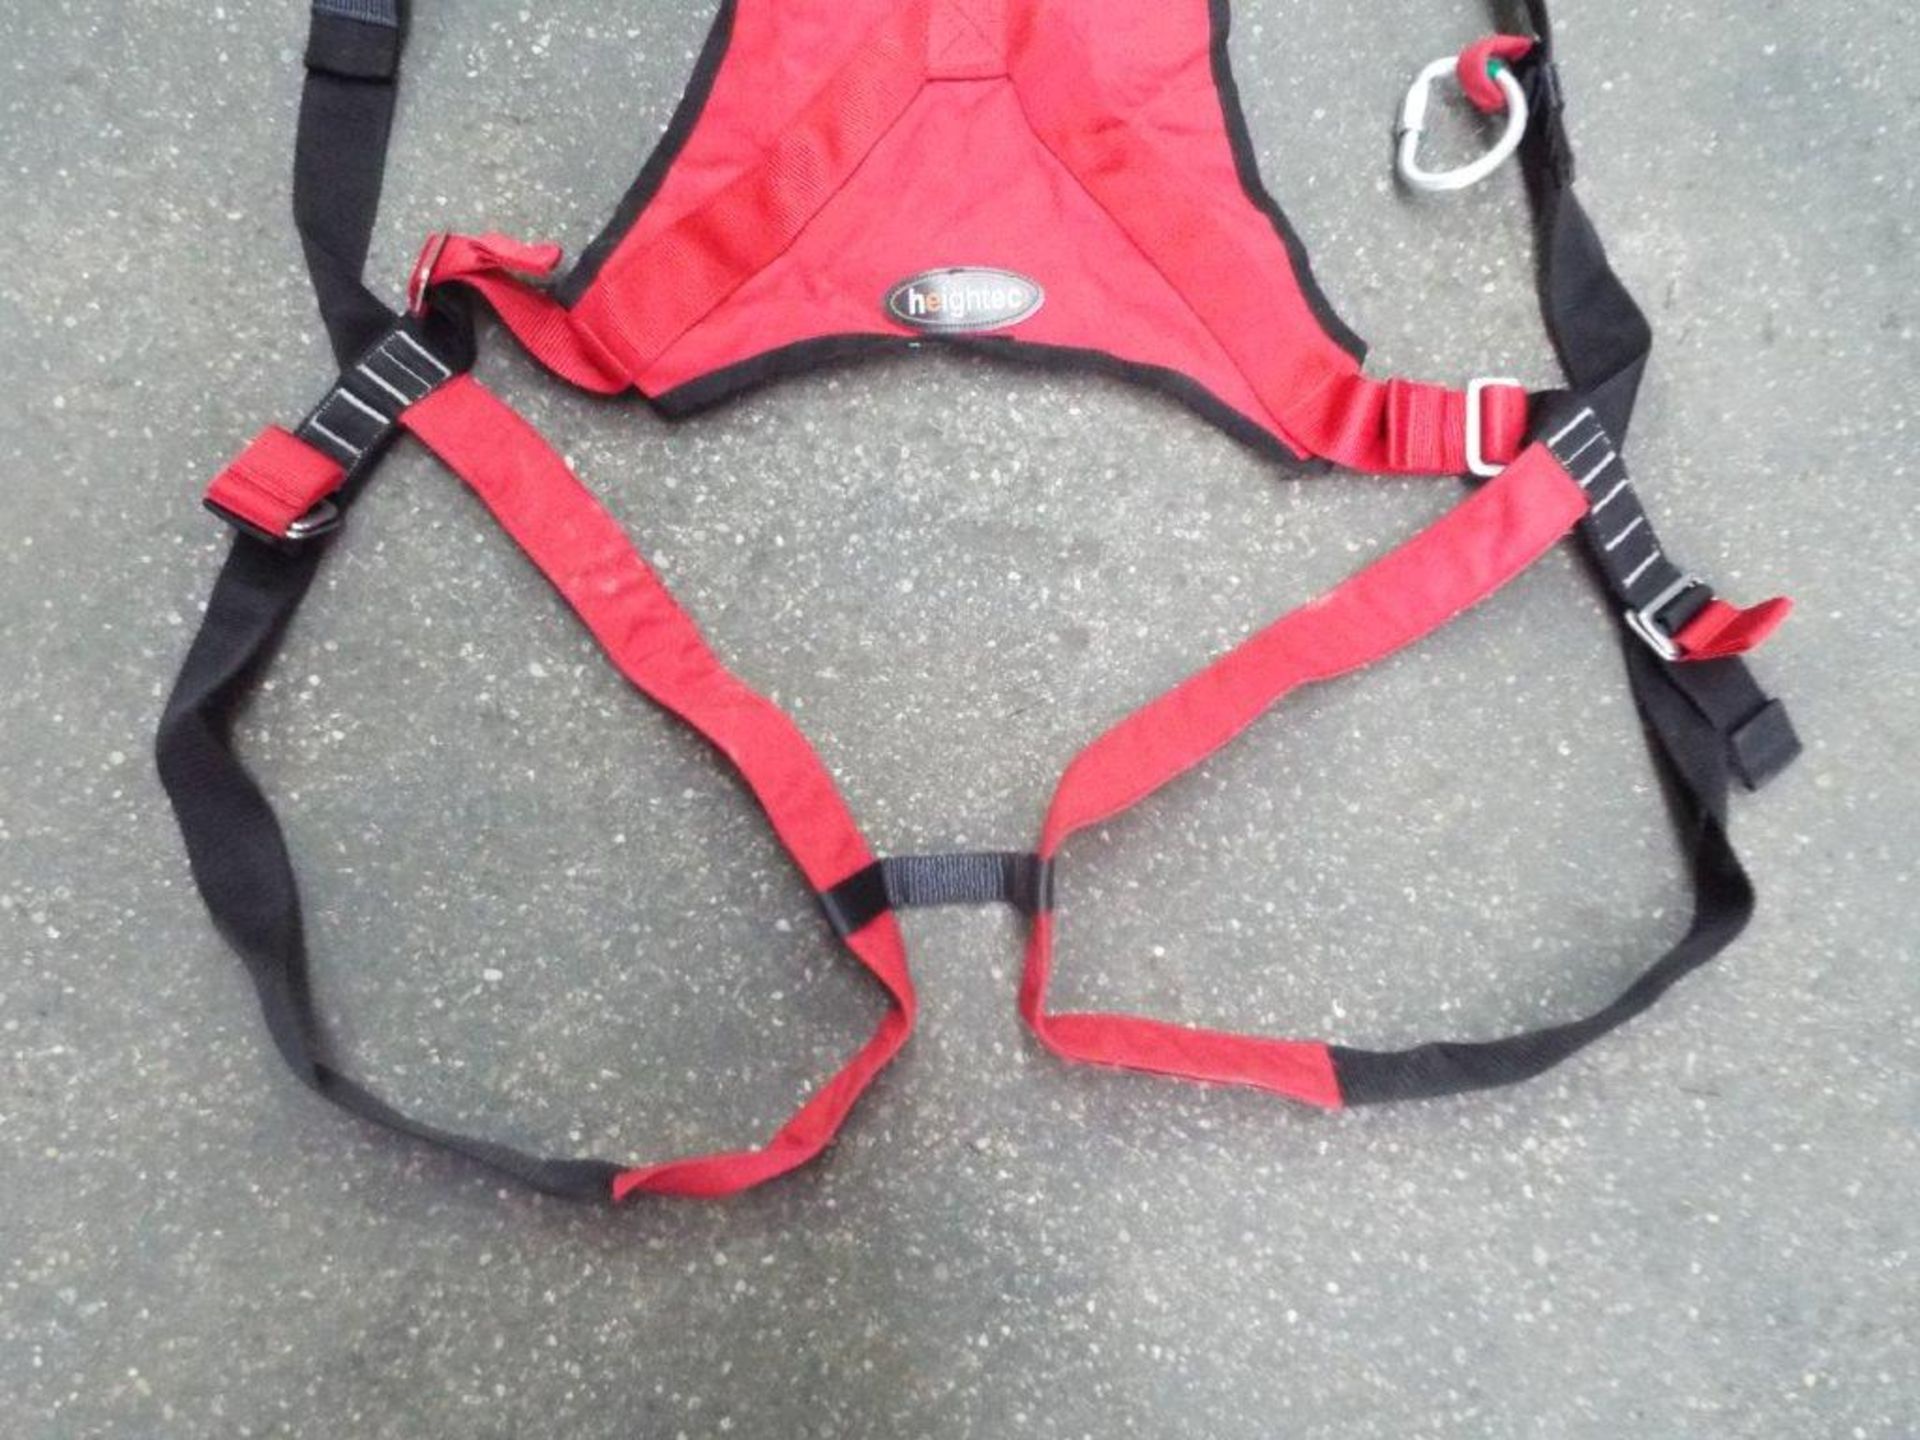 10 x Heightec Phoenix H11 Rescue Harness - Image 4 of 6